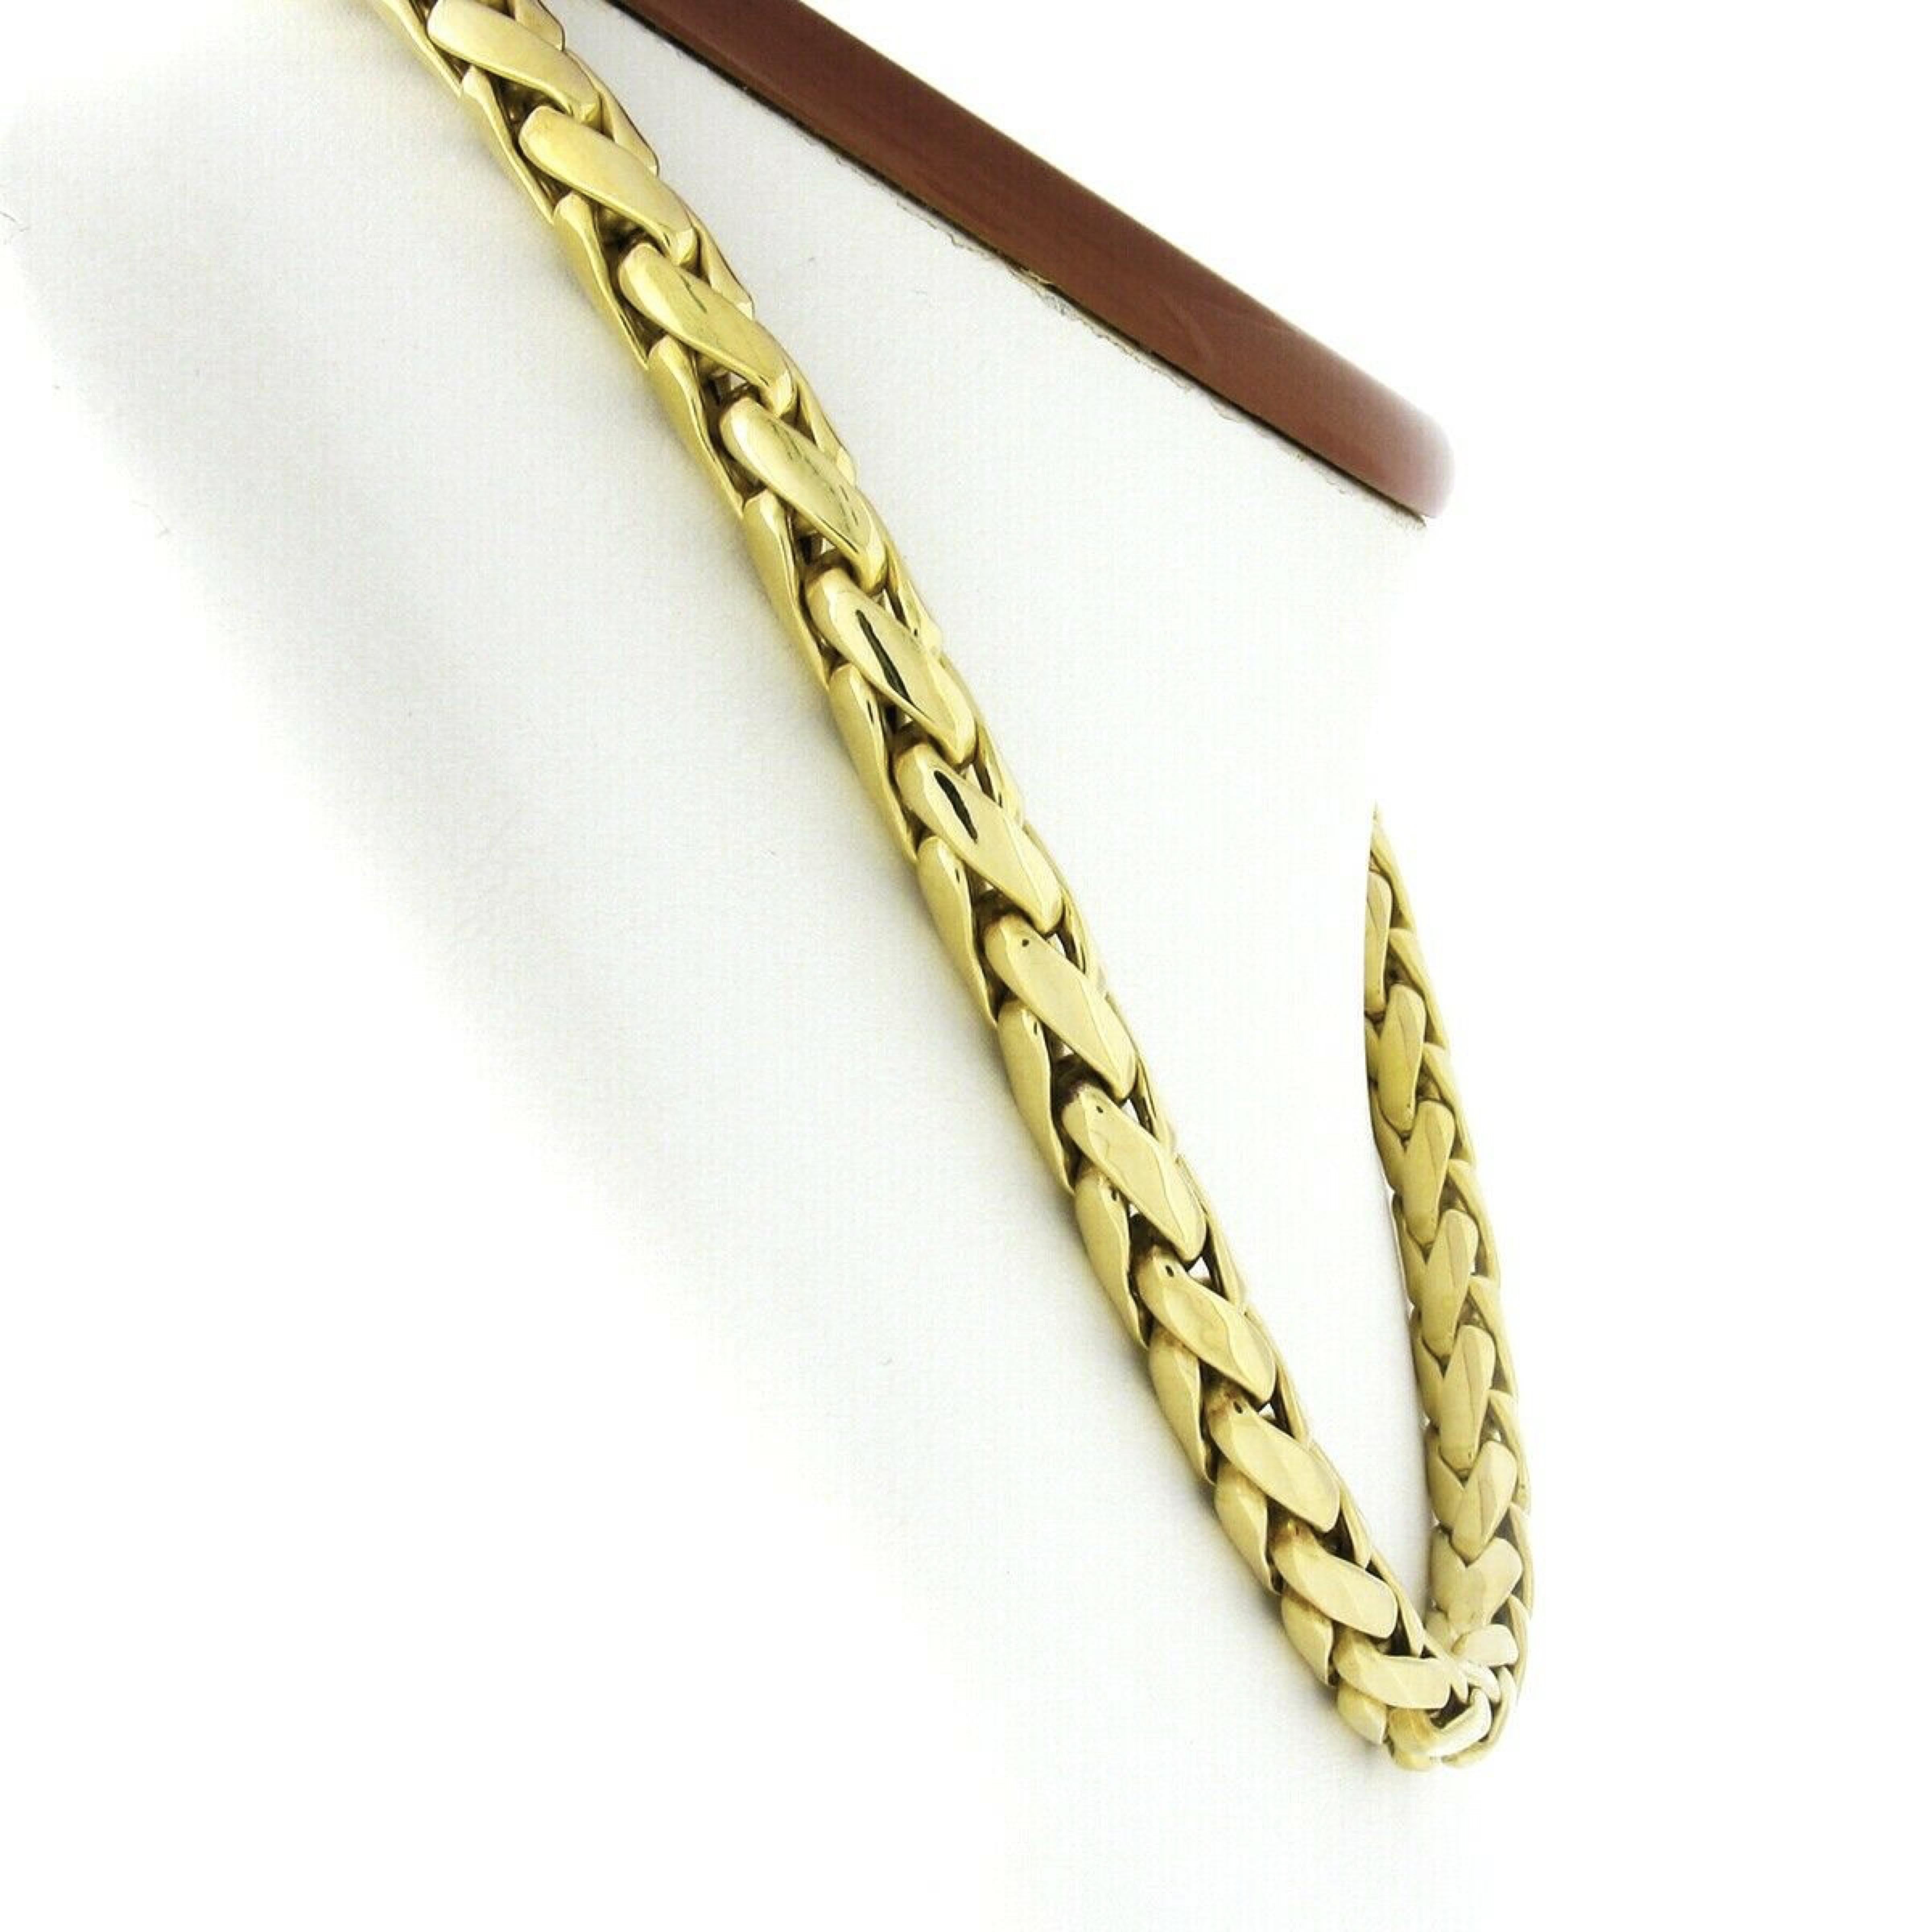 Here we have a gorgeous chain necklace crafted in solid 18k yellow gold featuring a wide wheat link design with a nice high polished finish throughout. This chain measures 16.5 inches in length and 7.5mm wide with a truly bold and absolutely elegant